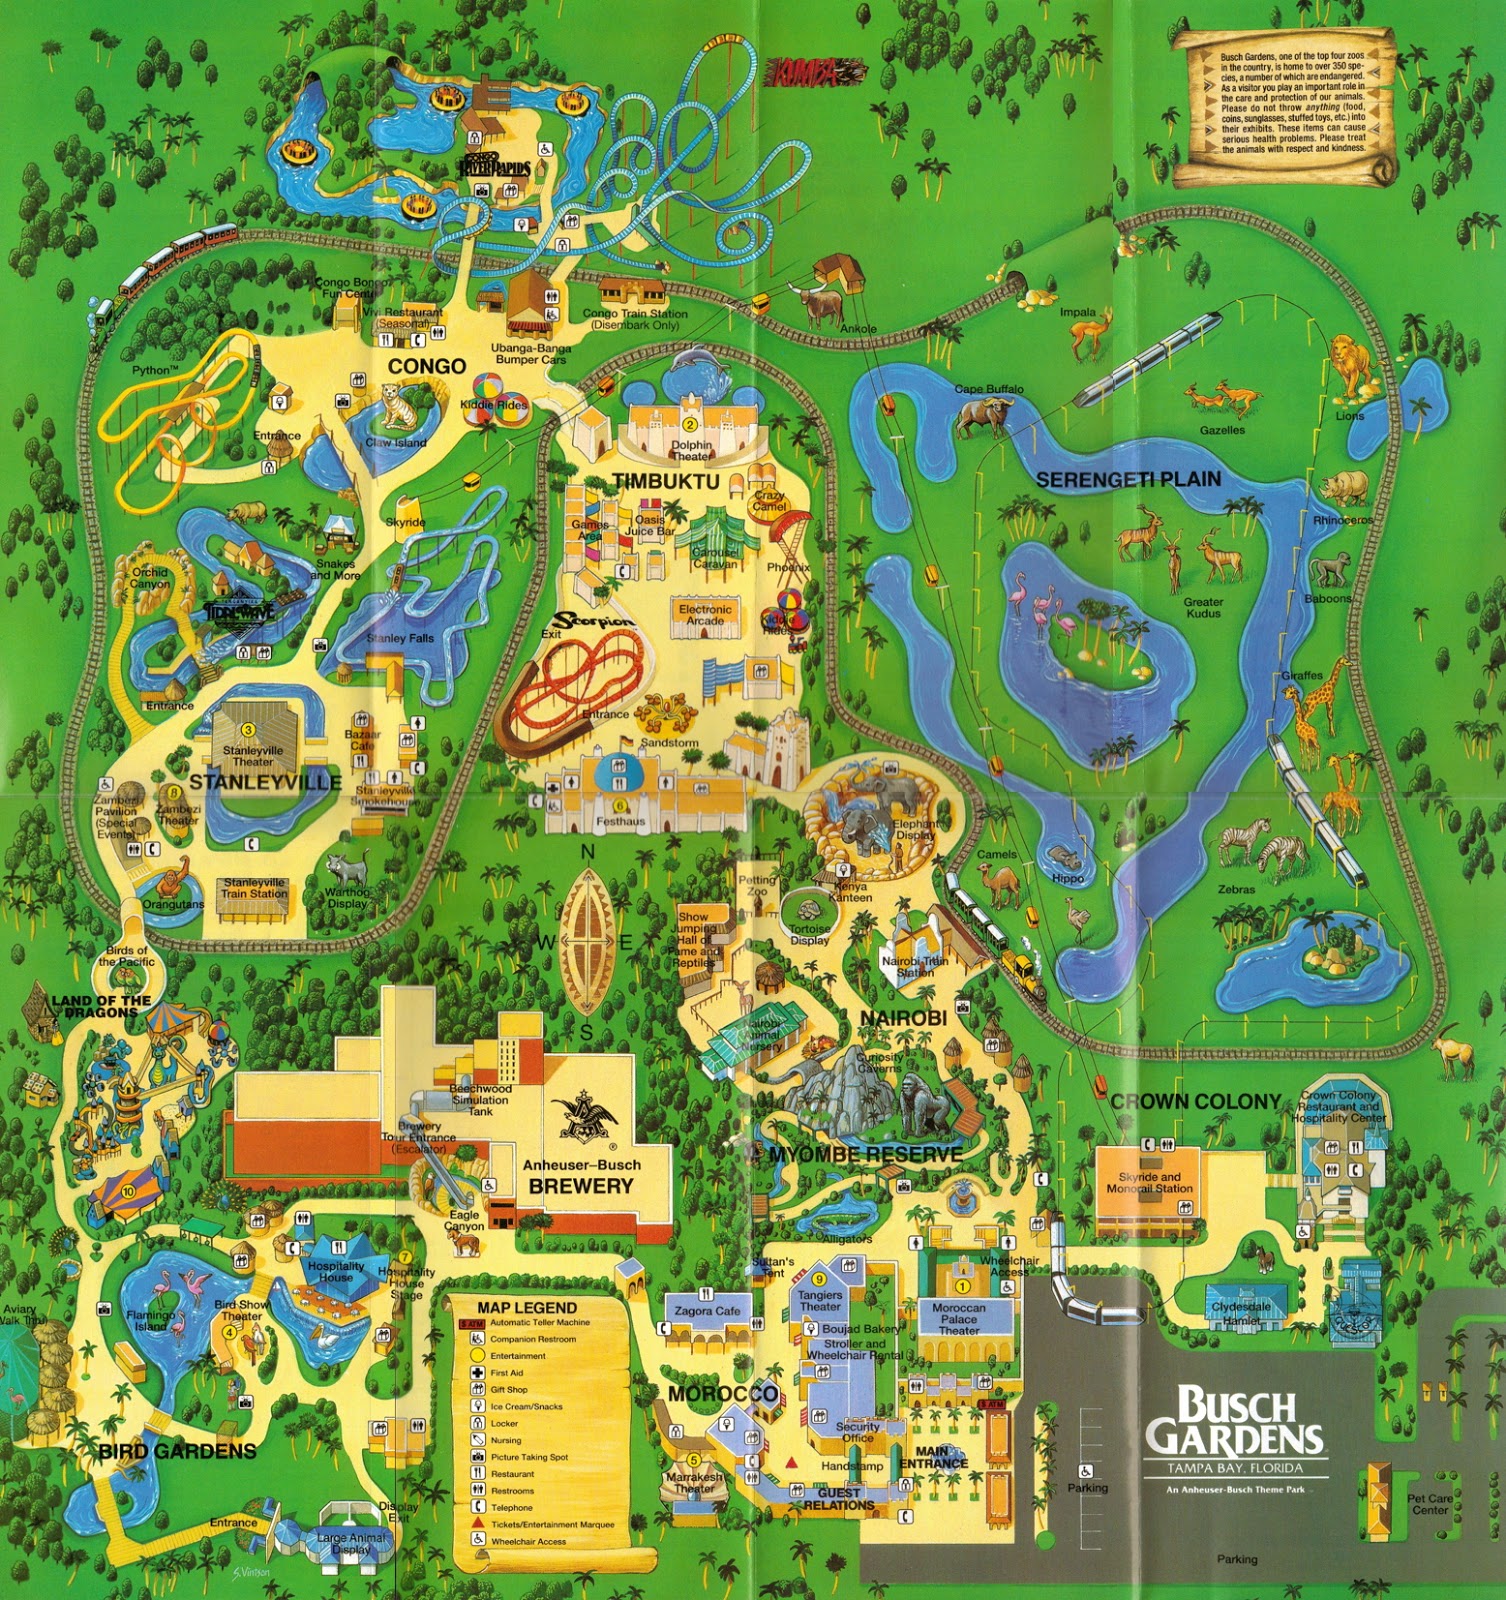 busch gardens tampa map Newsplusnotes From The Vault Busch Gardens Tampa 1995 Map busch gardens tampa map